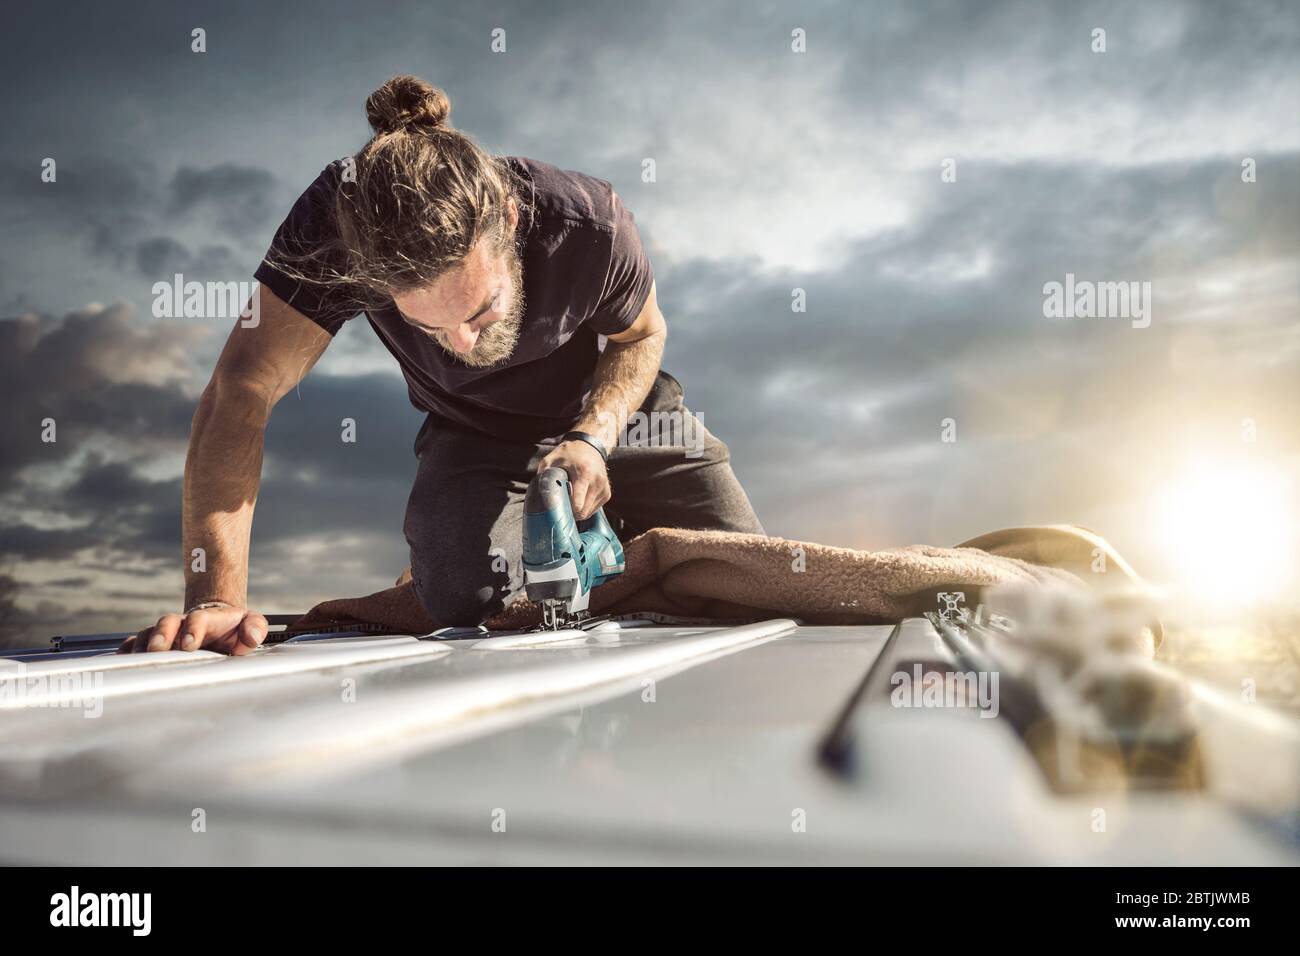 Young man working with a jigsaw Stock Photo